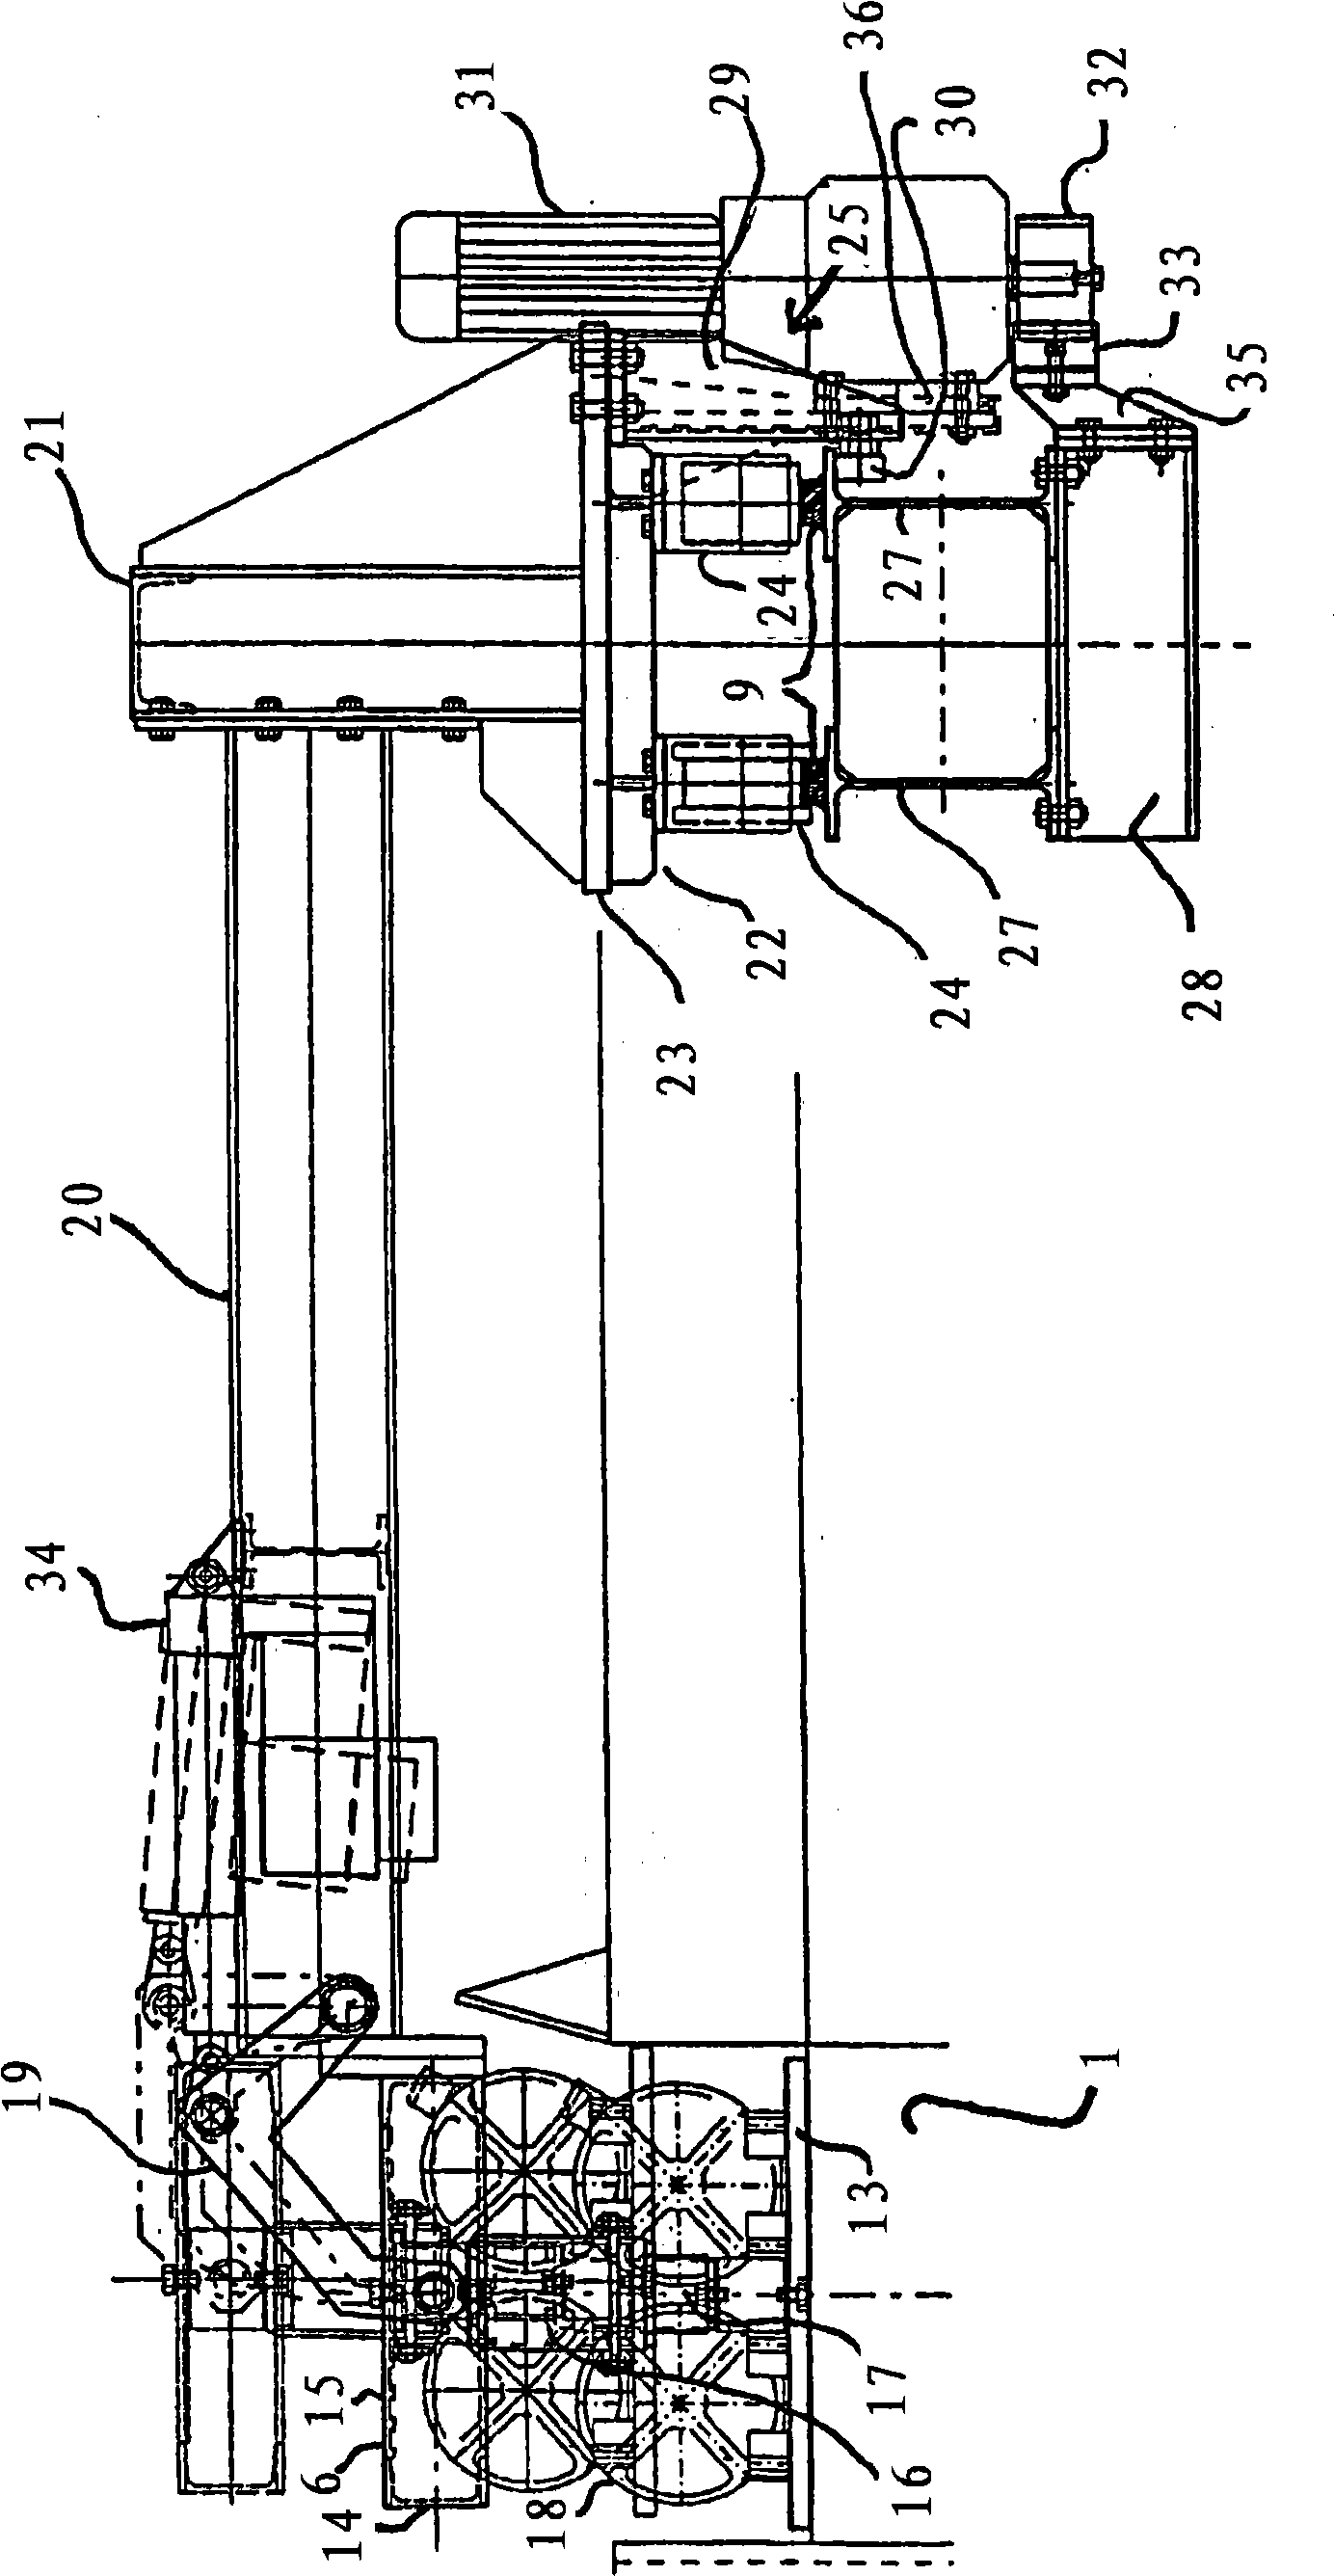 Method and device for removing loose material on wavy surfaces of stamped coal used for coking